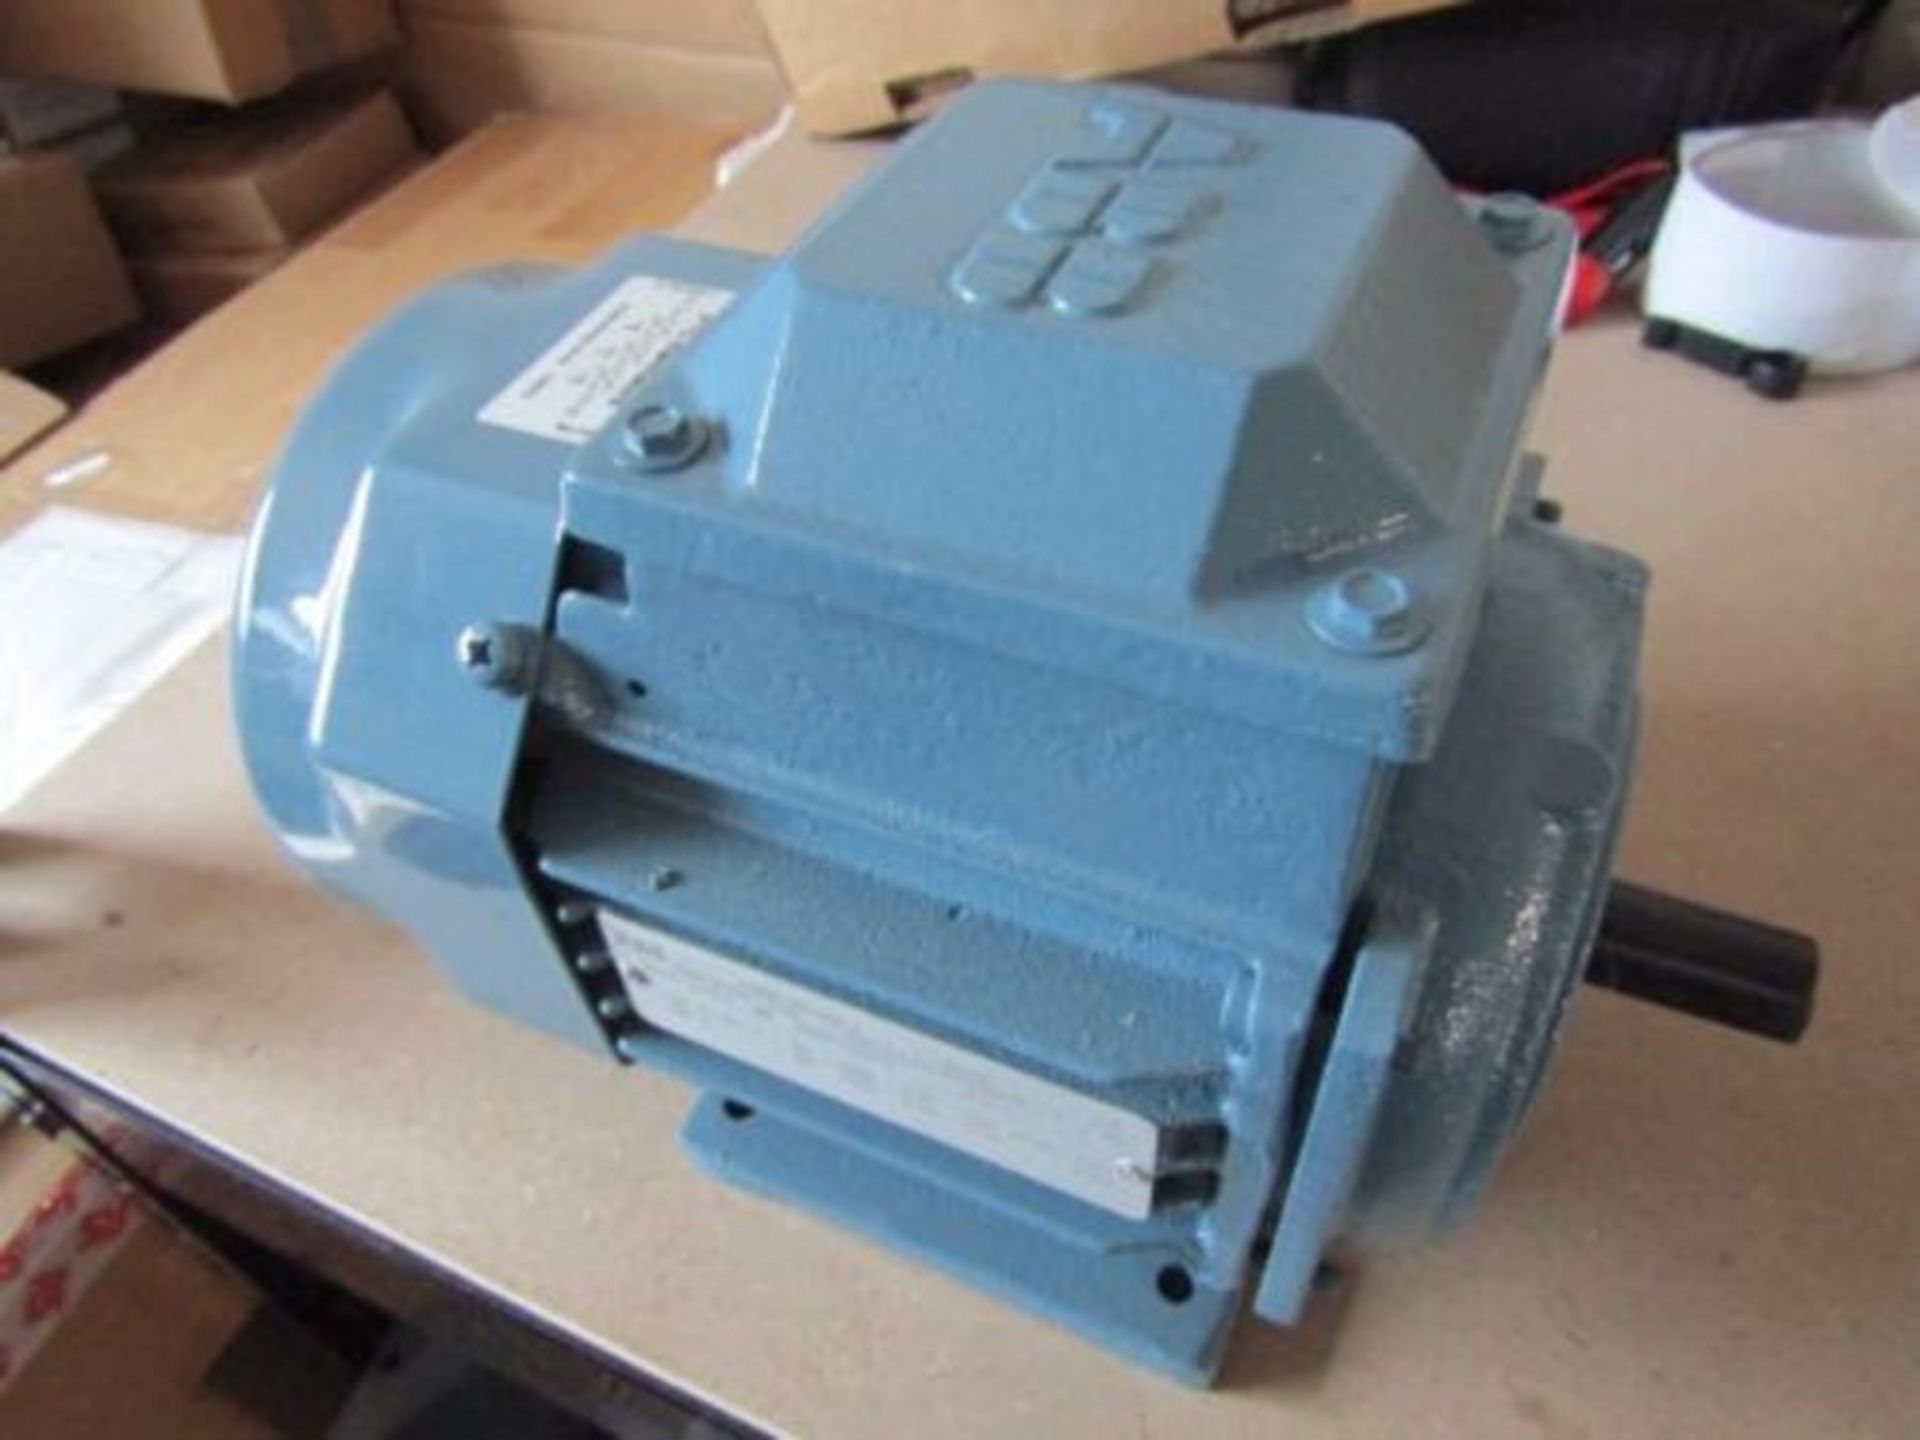 4 x ABB 3ph 2P induction motors - £700 cost price in total - Image 2 of 2